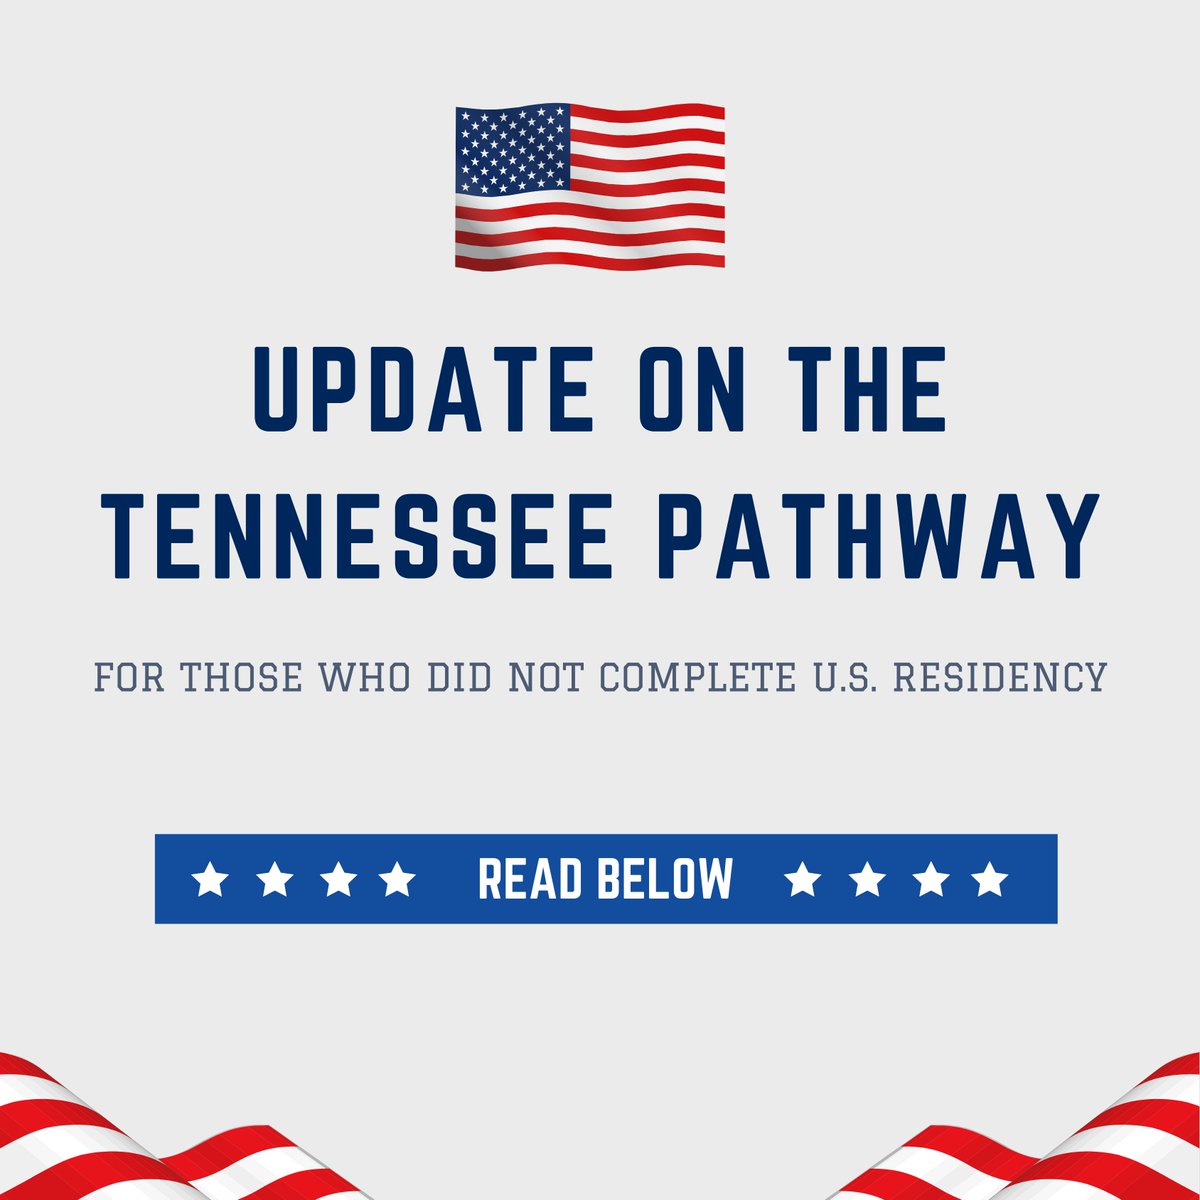 Yesterday, I contacted the Medical Board of Tennessee for updates about the pathway for issuing a license to practice medicine in Tennessee to international medical graduates without repeating U.S. residency. ...[continue reading in the threads below]